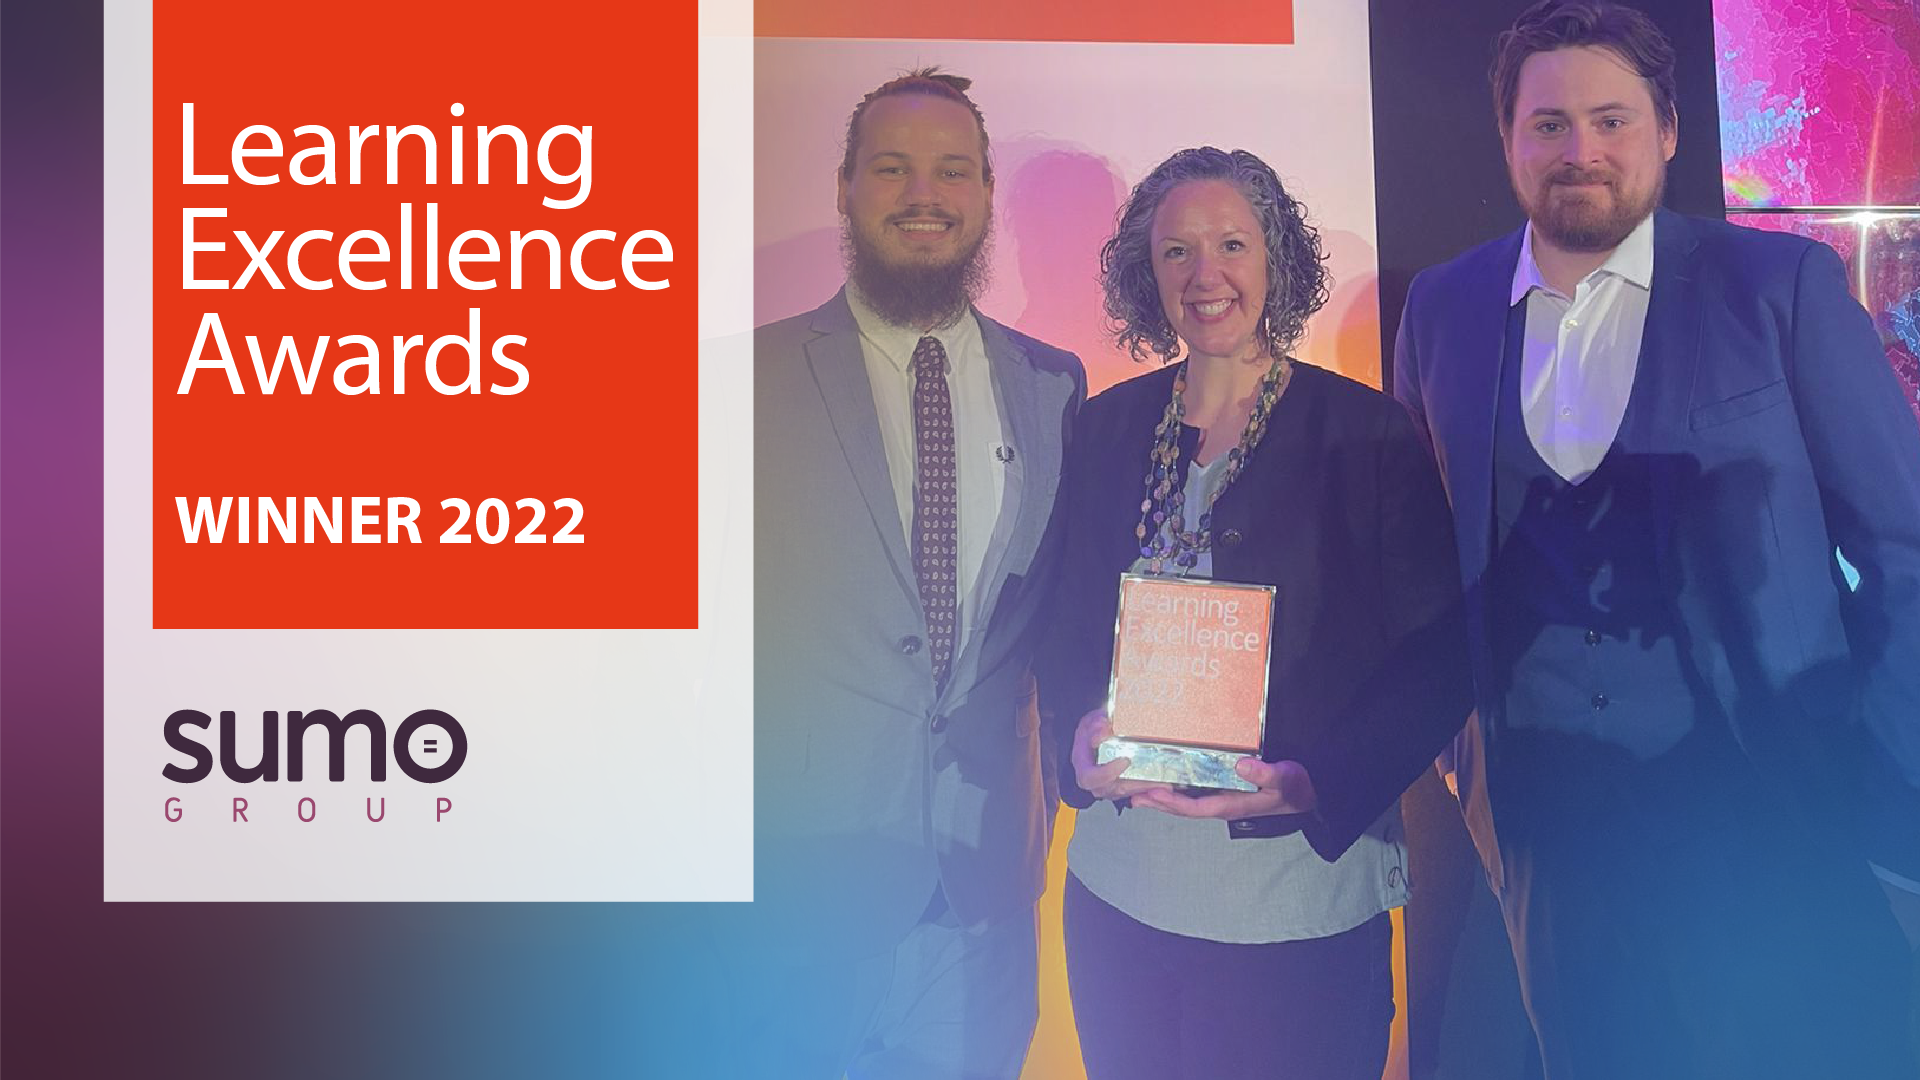 Sumo Group brings home award for Digital Learning at the 2022 Learning ...